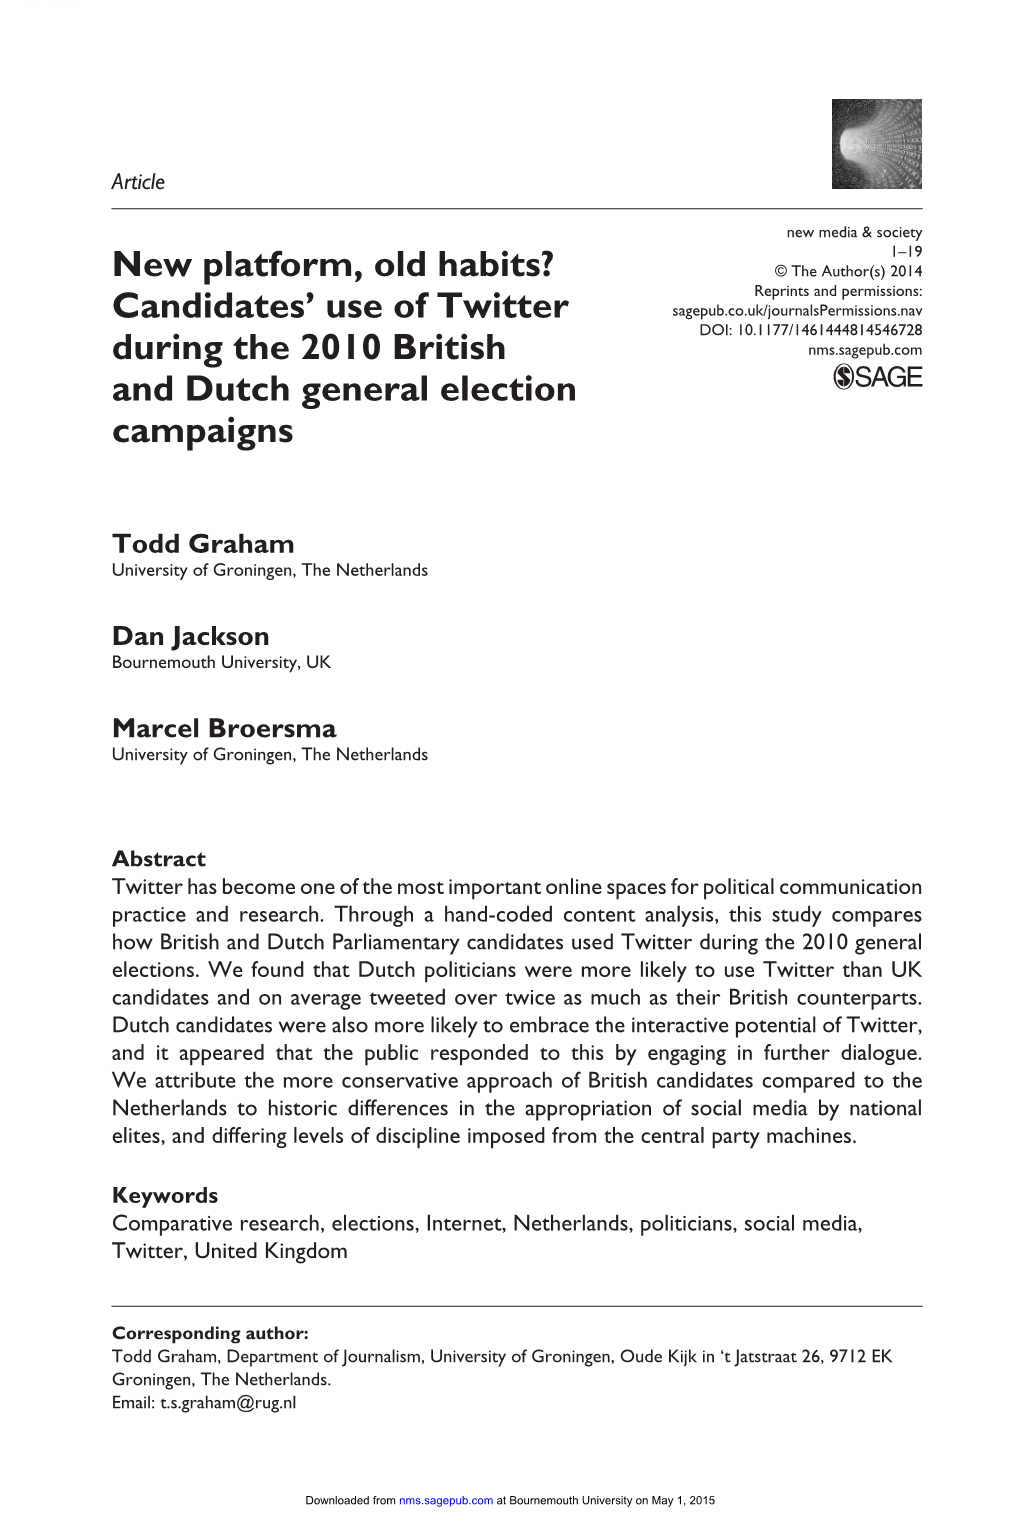 Candidates' Use of Twitter During the 2010 British and Dutch General